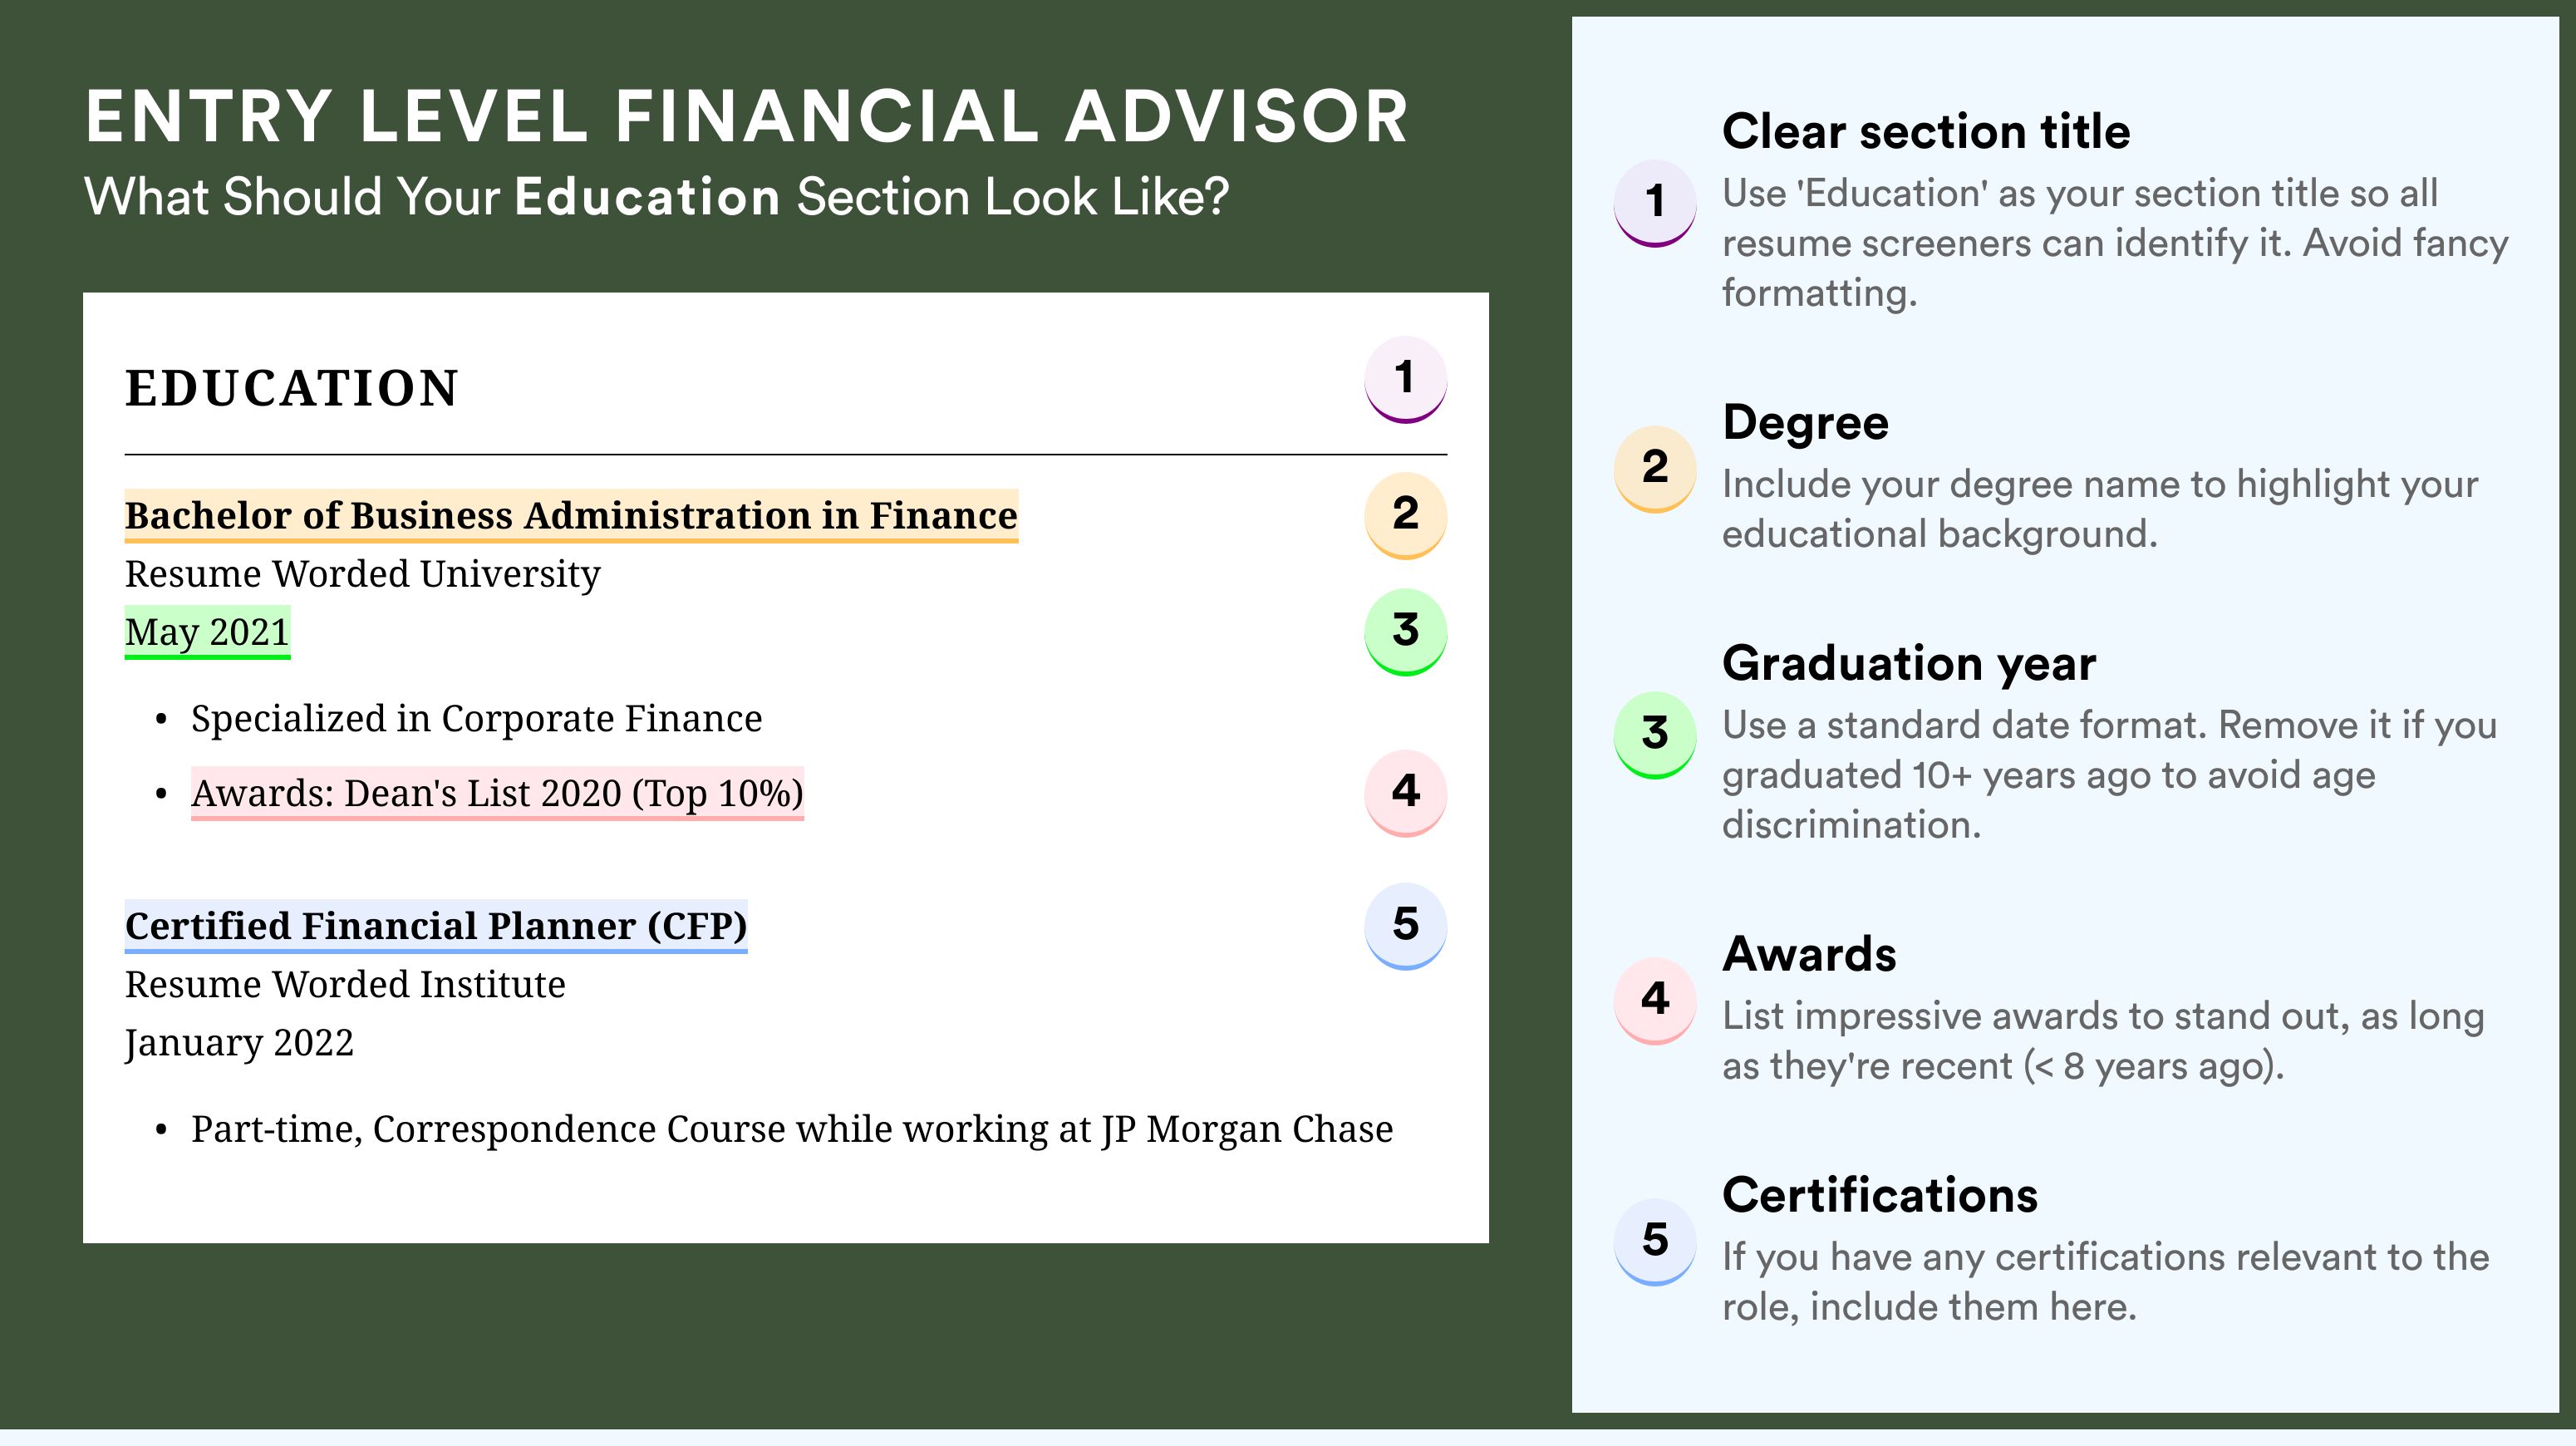 How To Write An Education Section - Entry Level Financial Advisor Roles